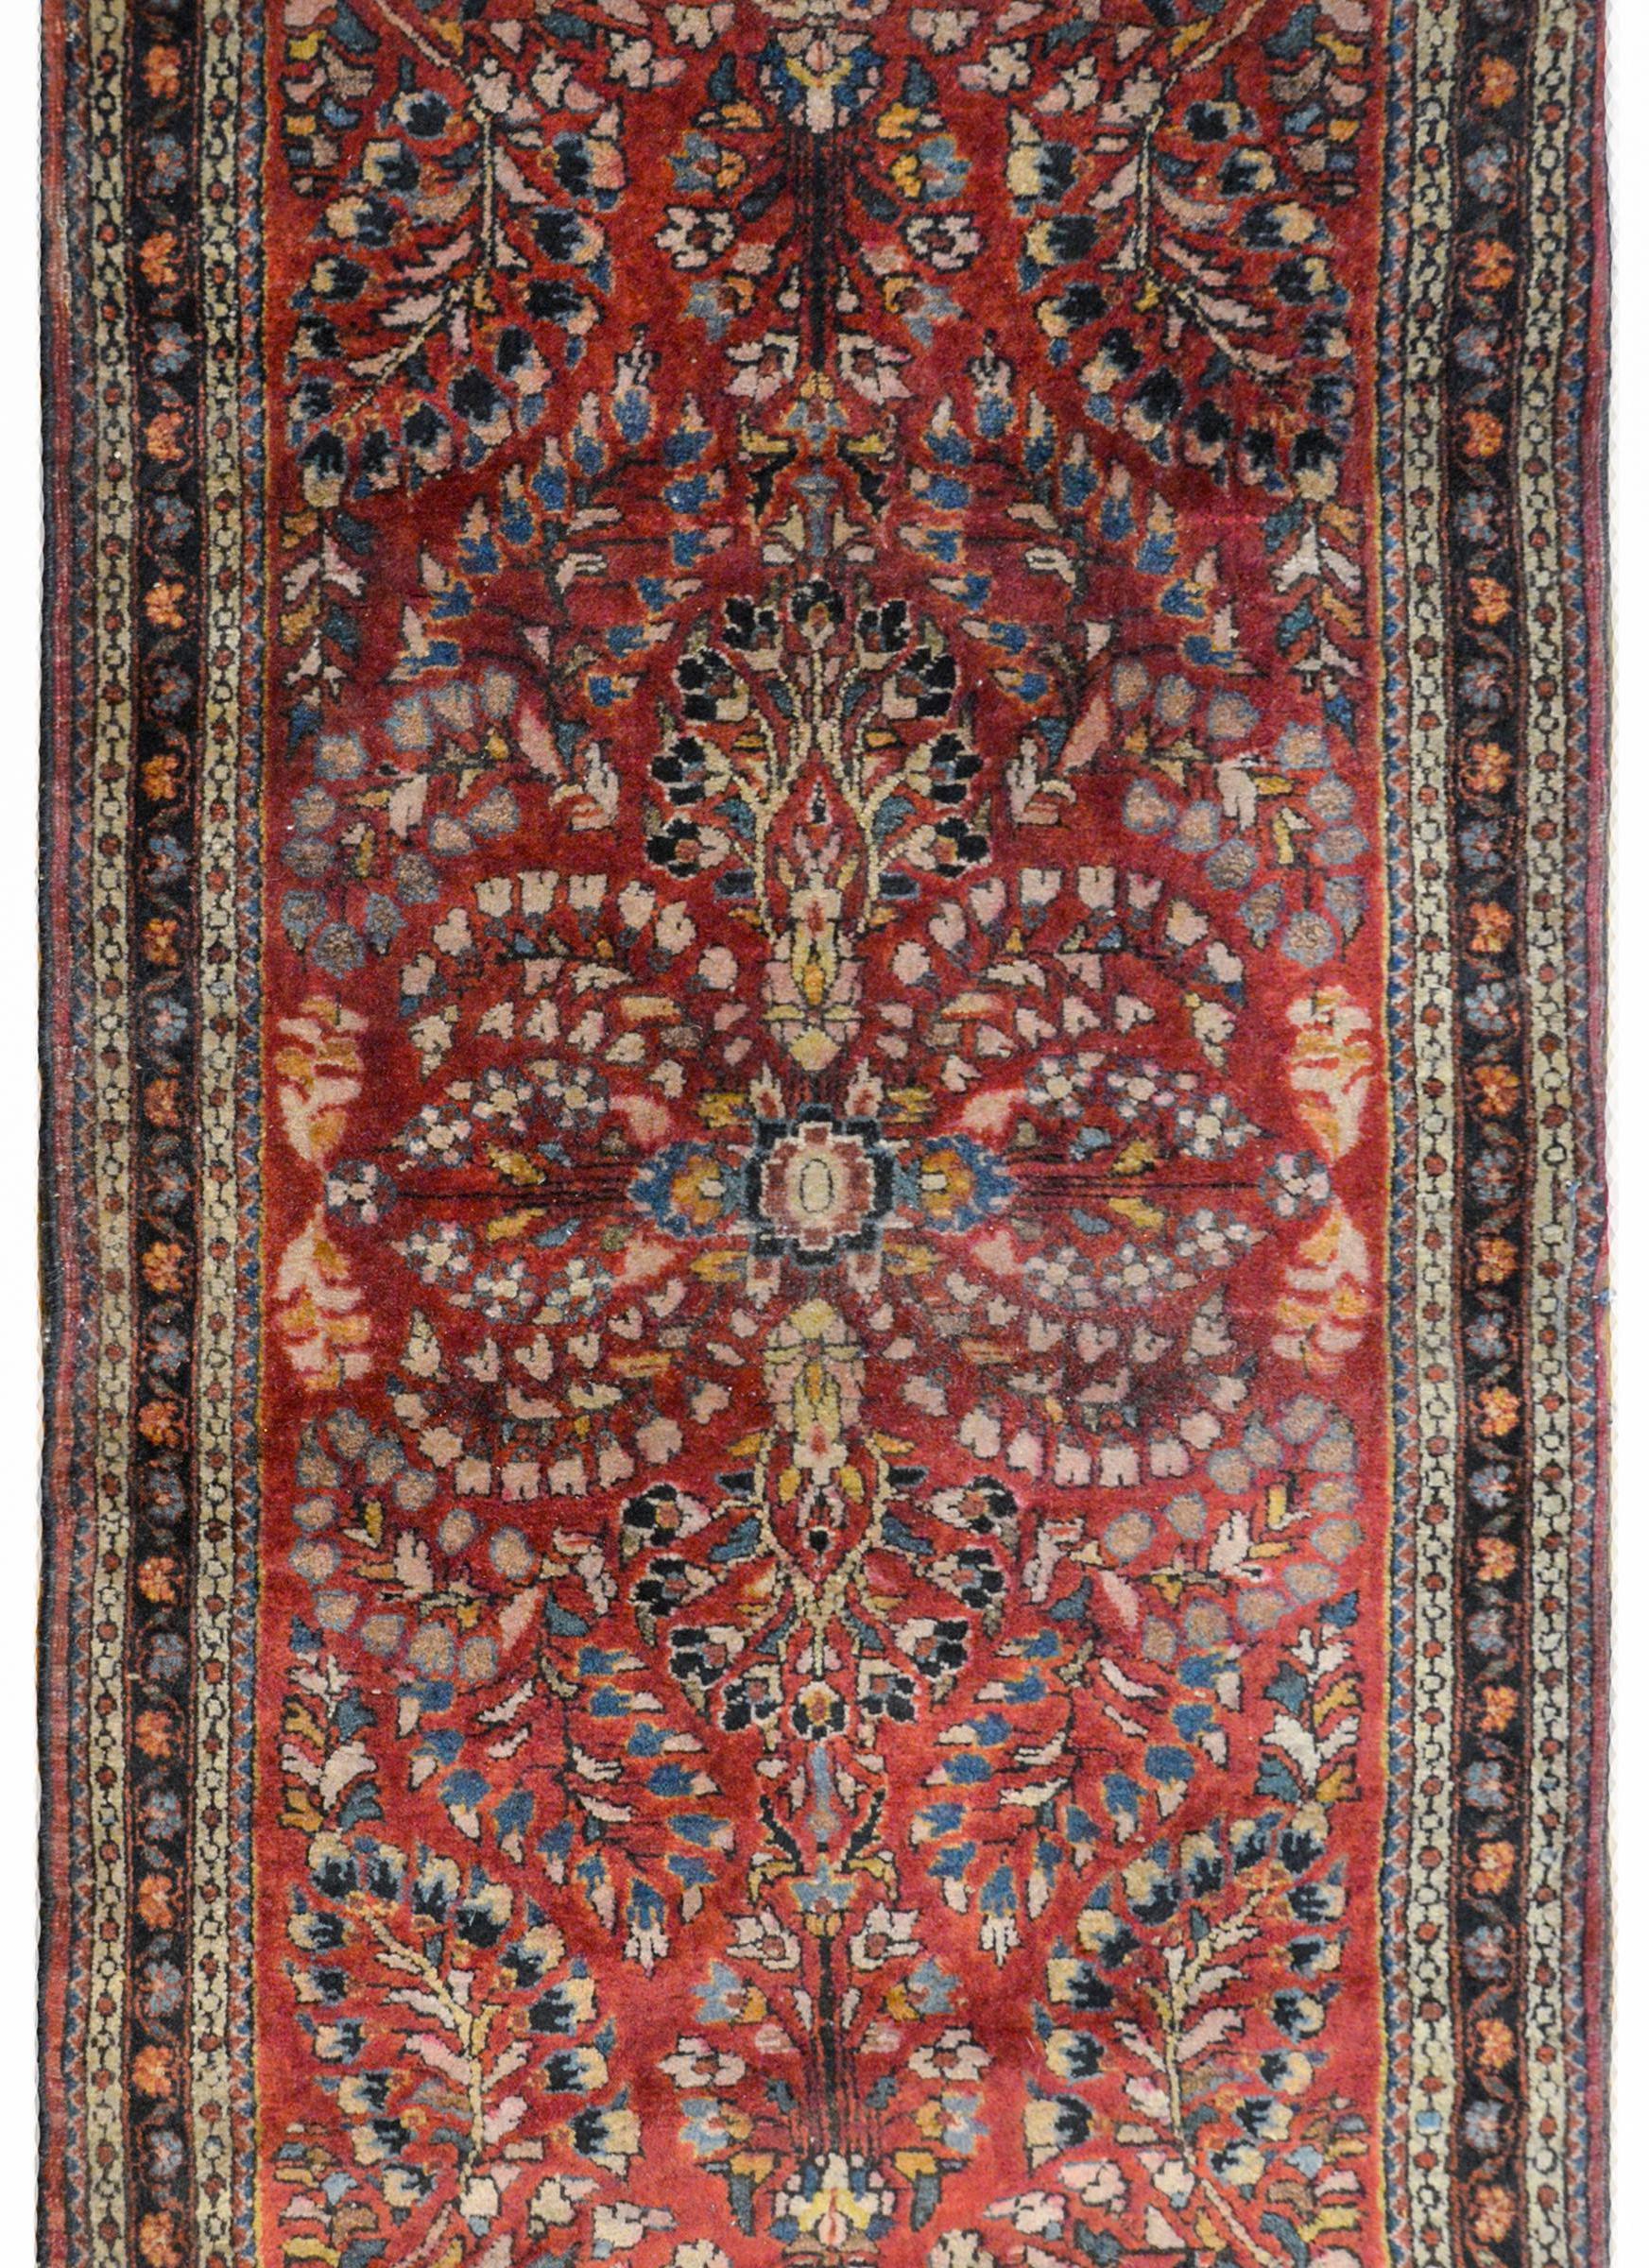 A gorgeous early 20th century Persian Sarouk rug with a wonderful mirrored floral and scrolling vine pattern woven in cream, light and dark indigo, orange, gold, and pink wool against a dark cranberry background. The border is sweet, with a wide